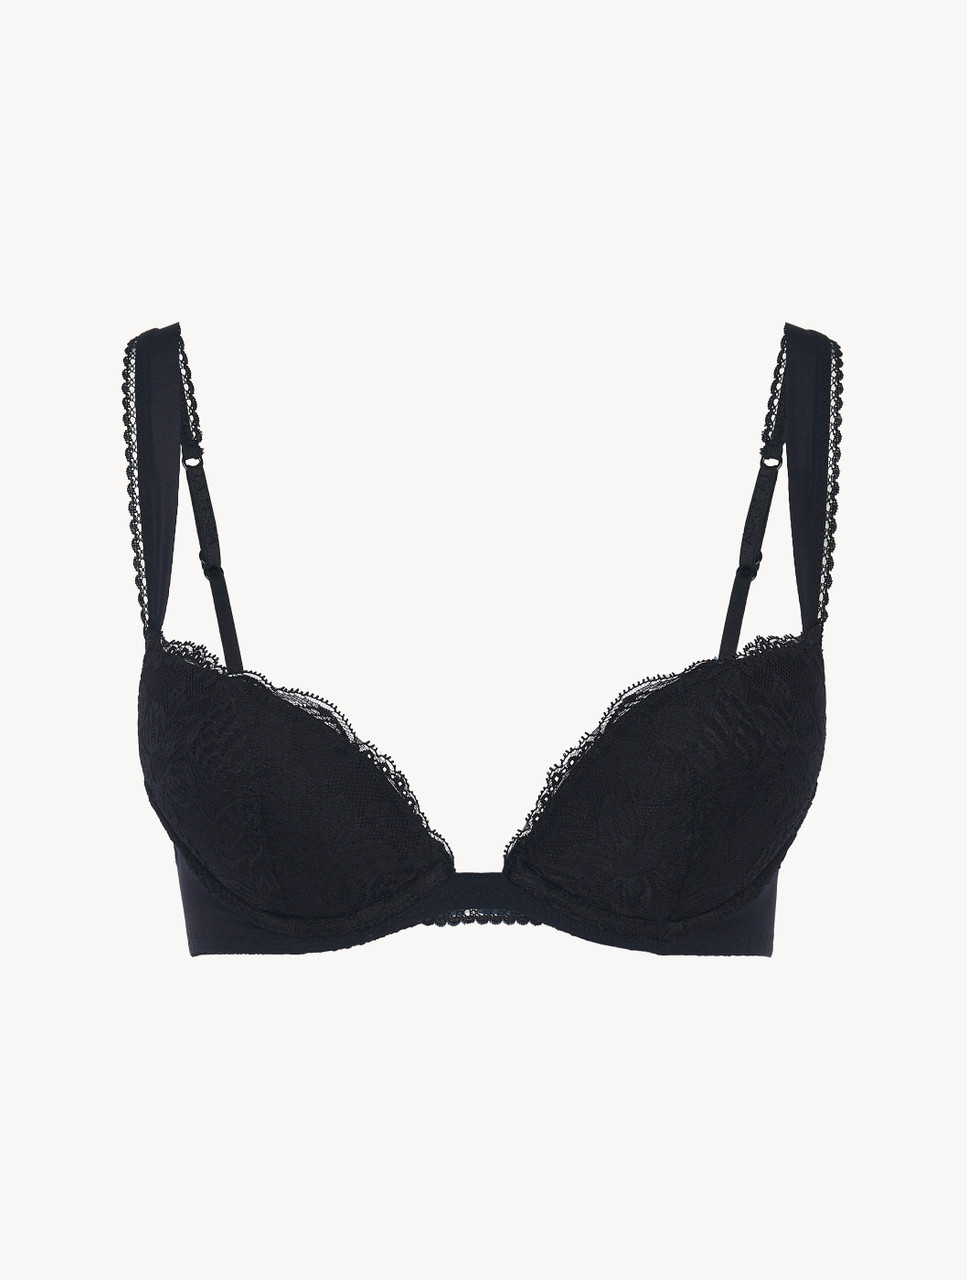 Black Padded Push-Up Bra With Leavers Lace Trim by La Perla at